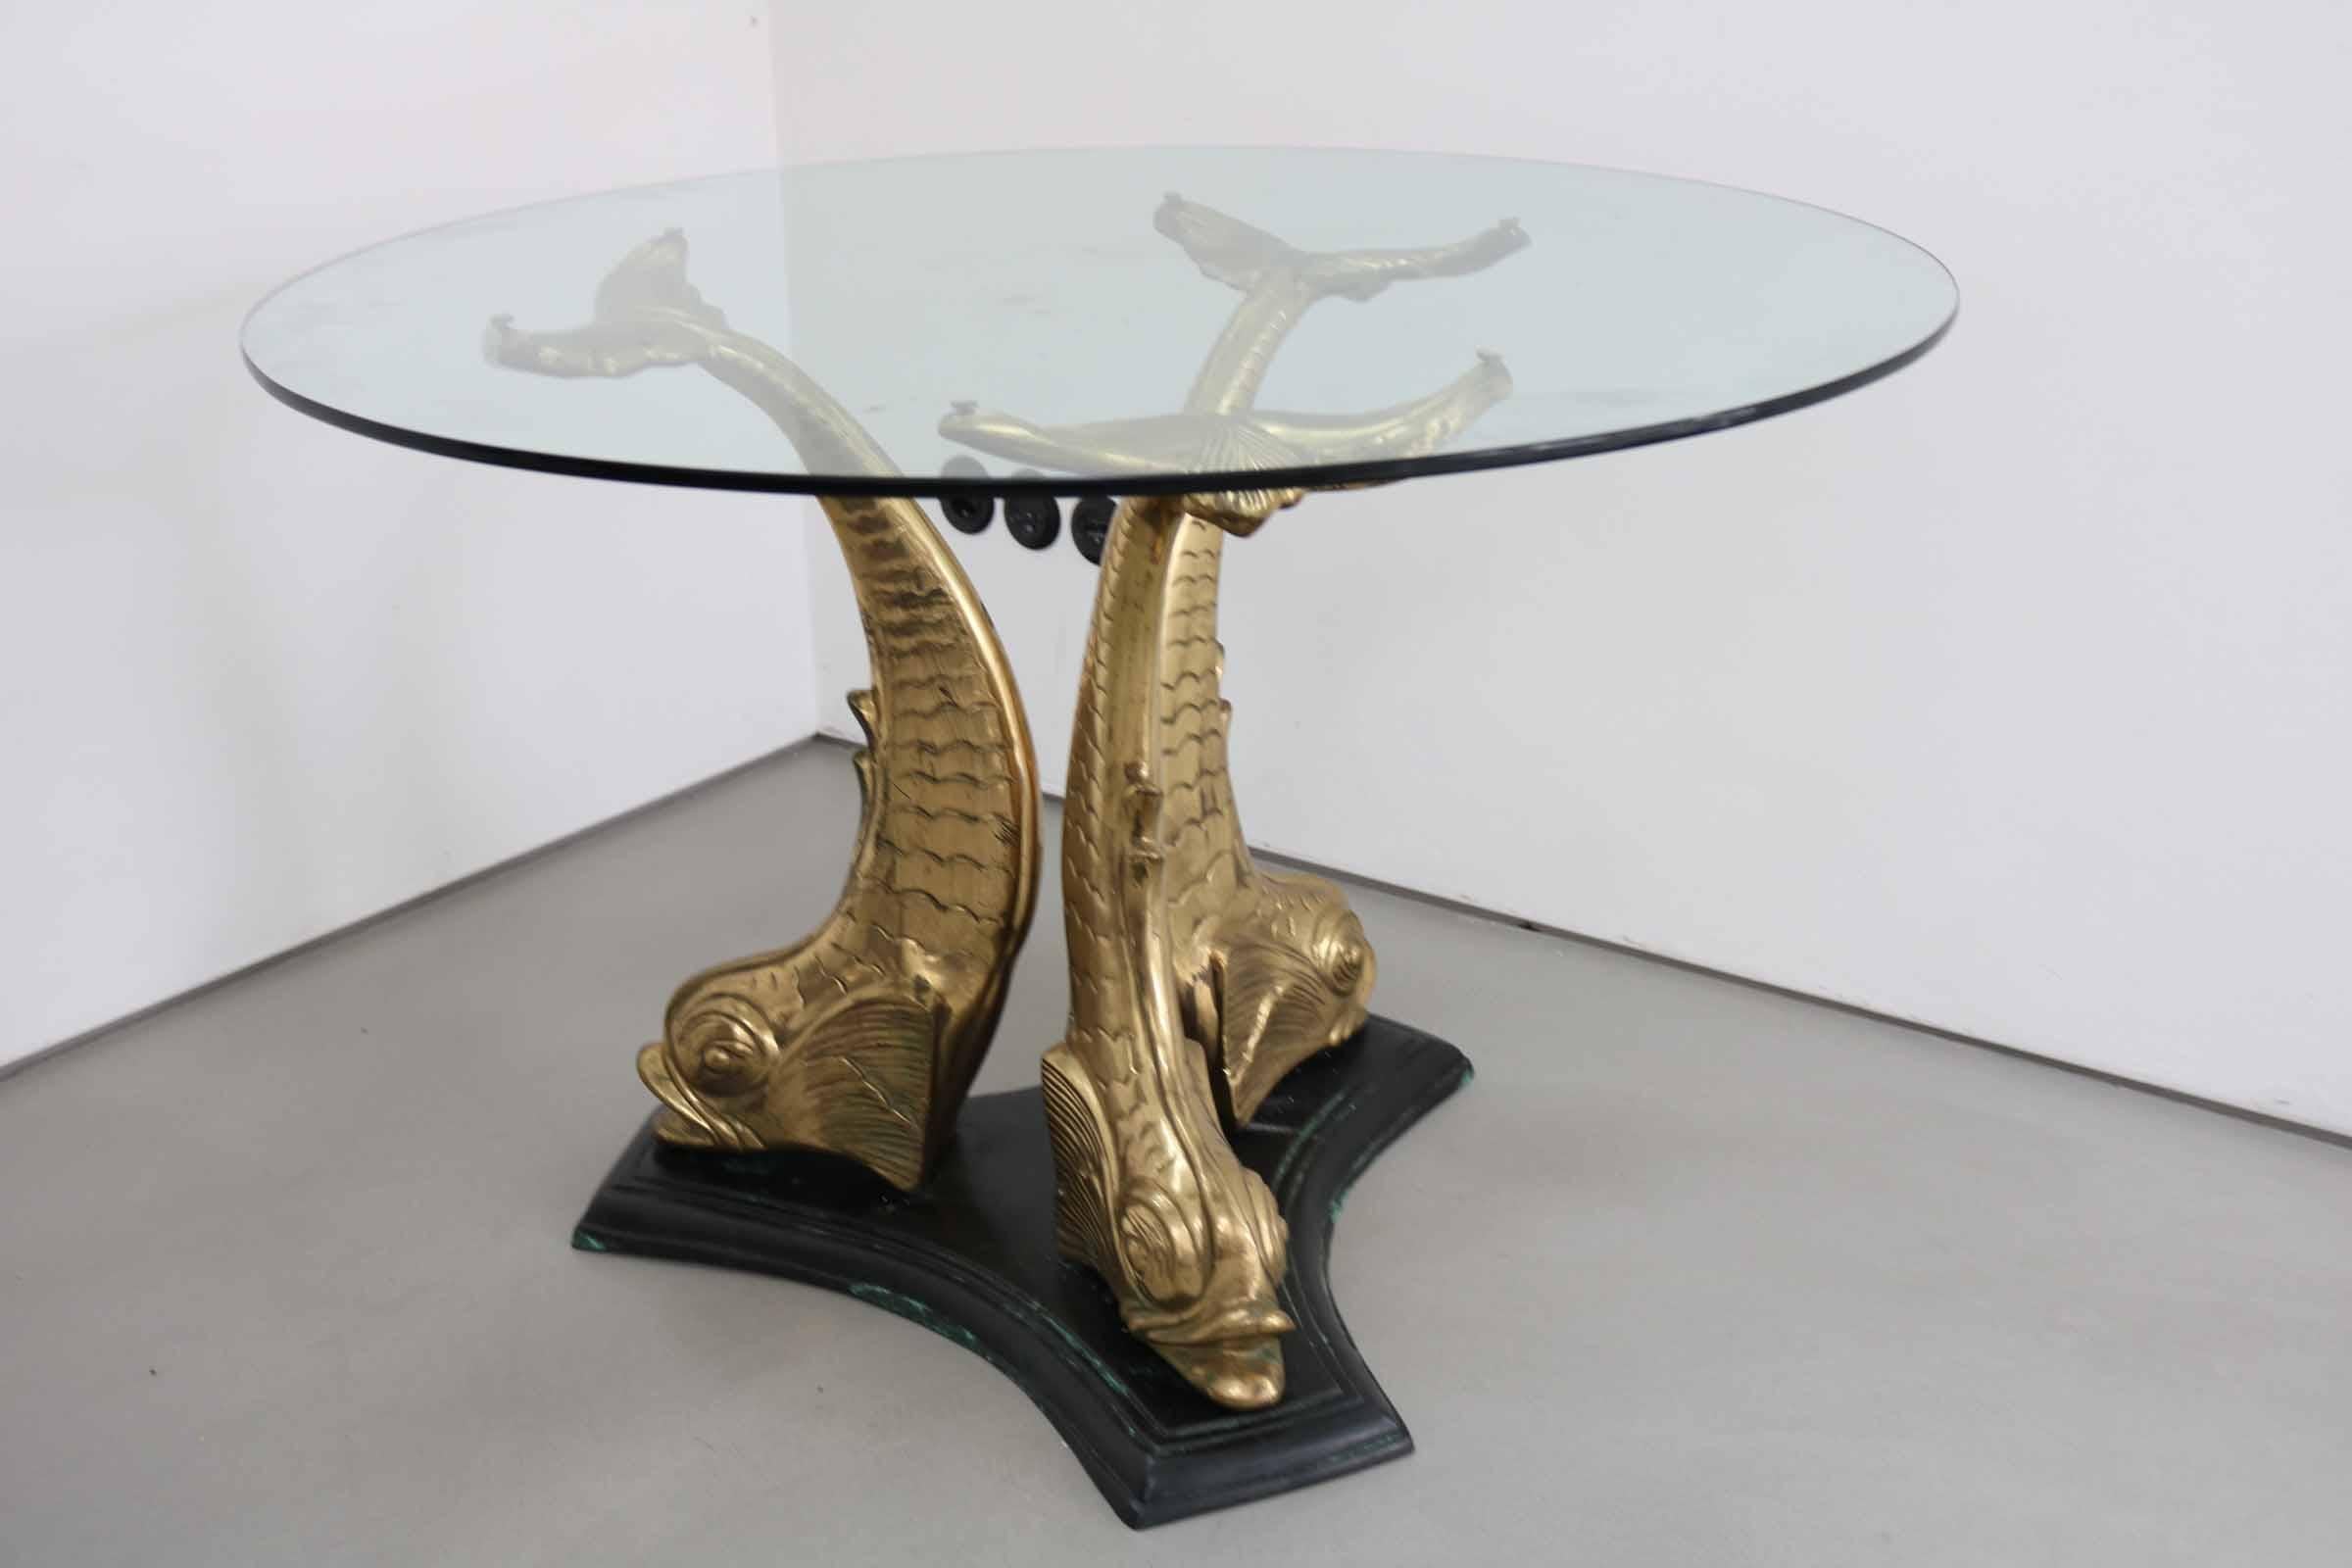 Hollywood Regency style brass and glass dining table, Italy 1960s. Good vintage condition.